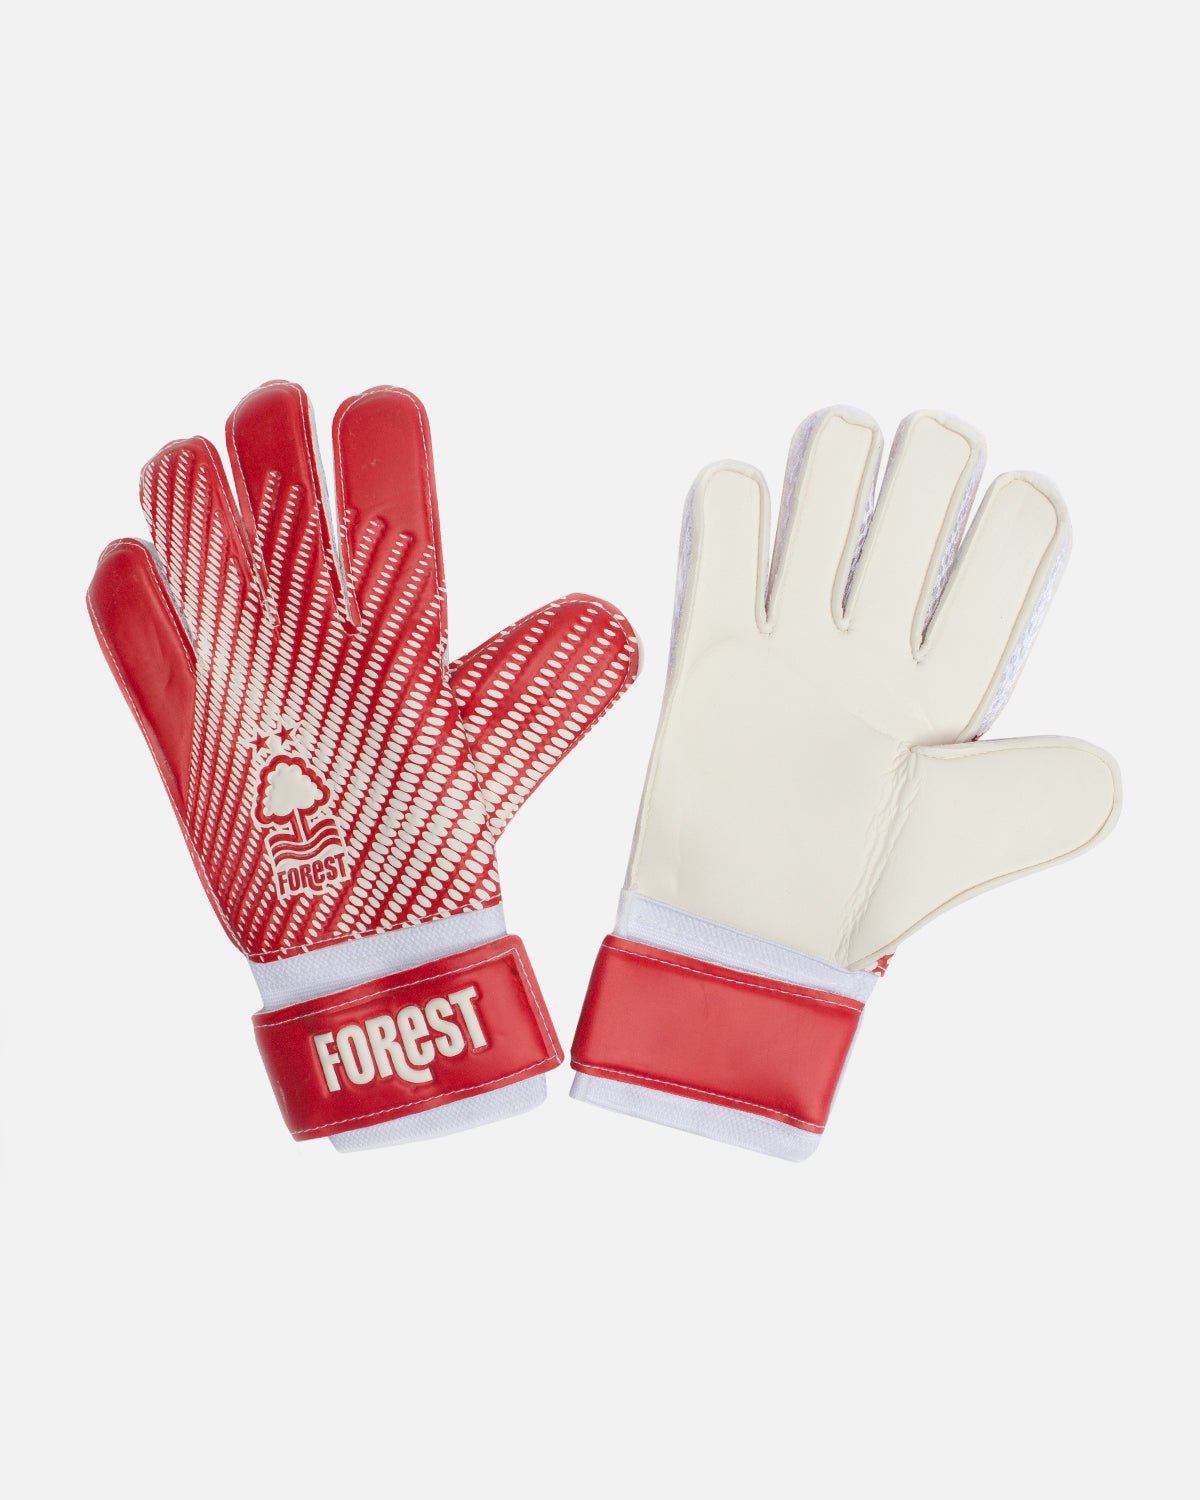 NFFC Padded Slip-in Shinpads - Nottingham Forest FC